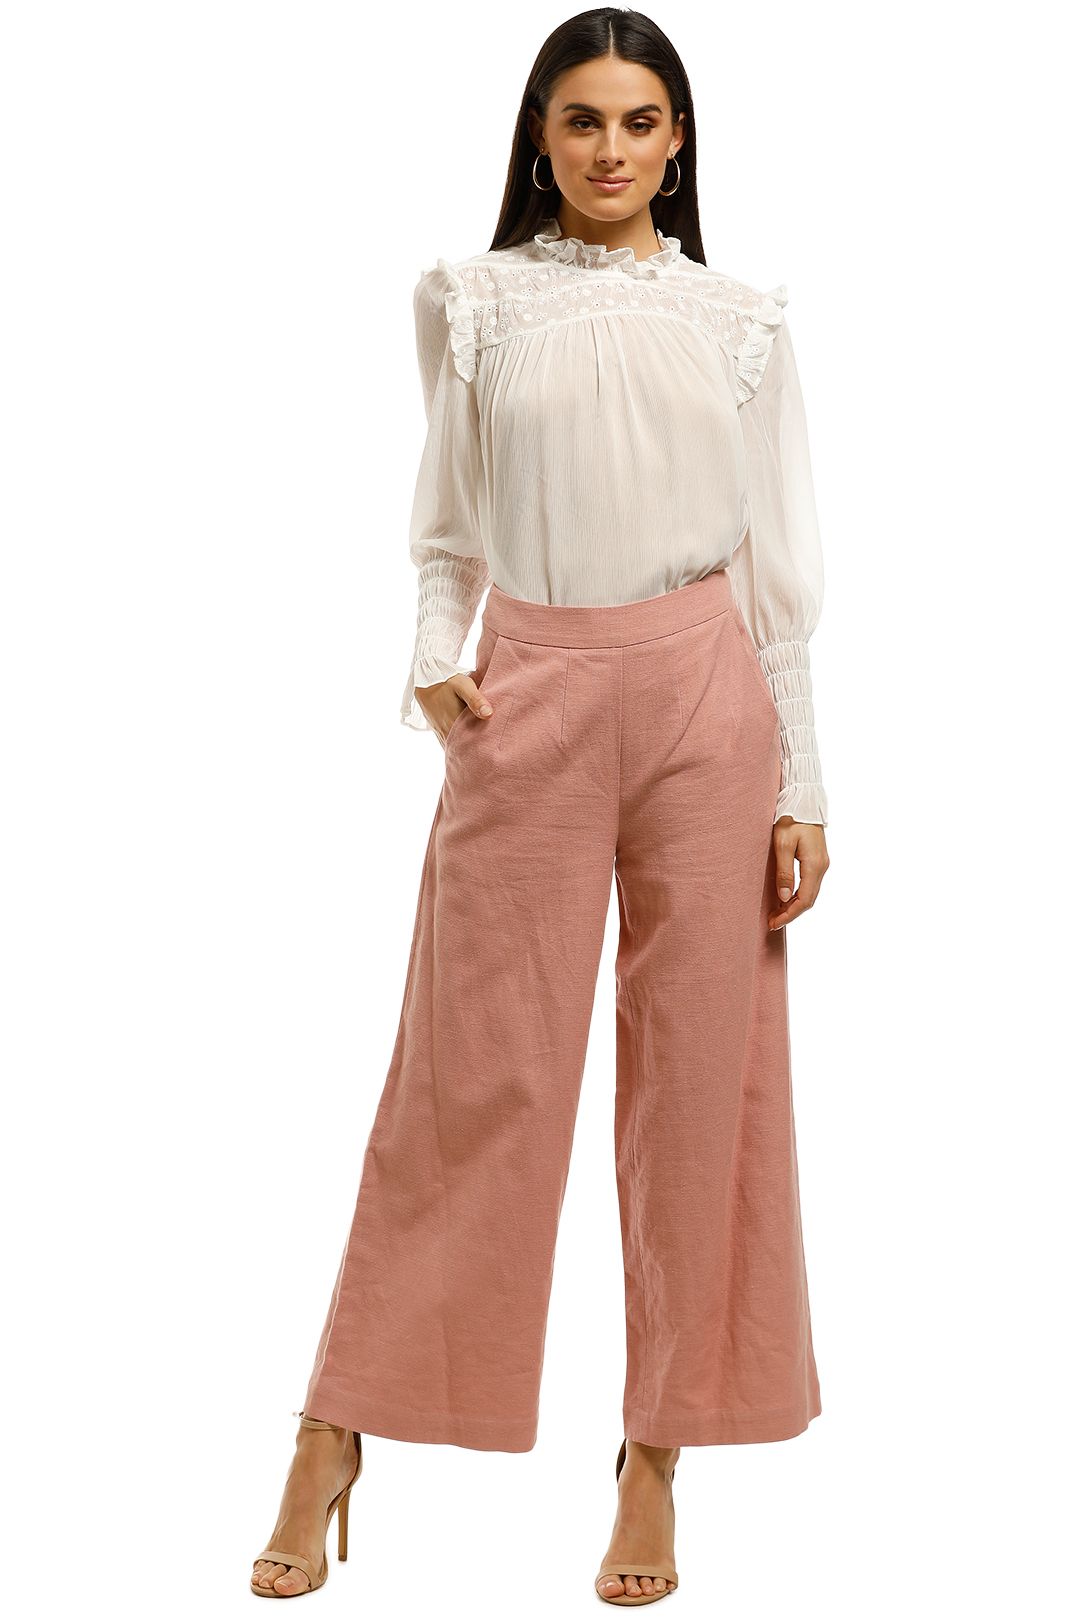 Ministry-Of-Style-Daybreak-Pants-Pink-Front